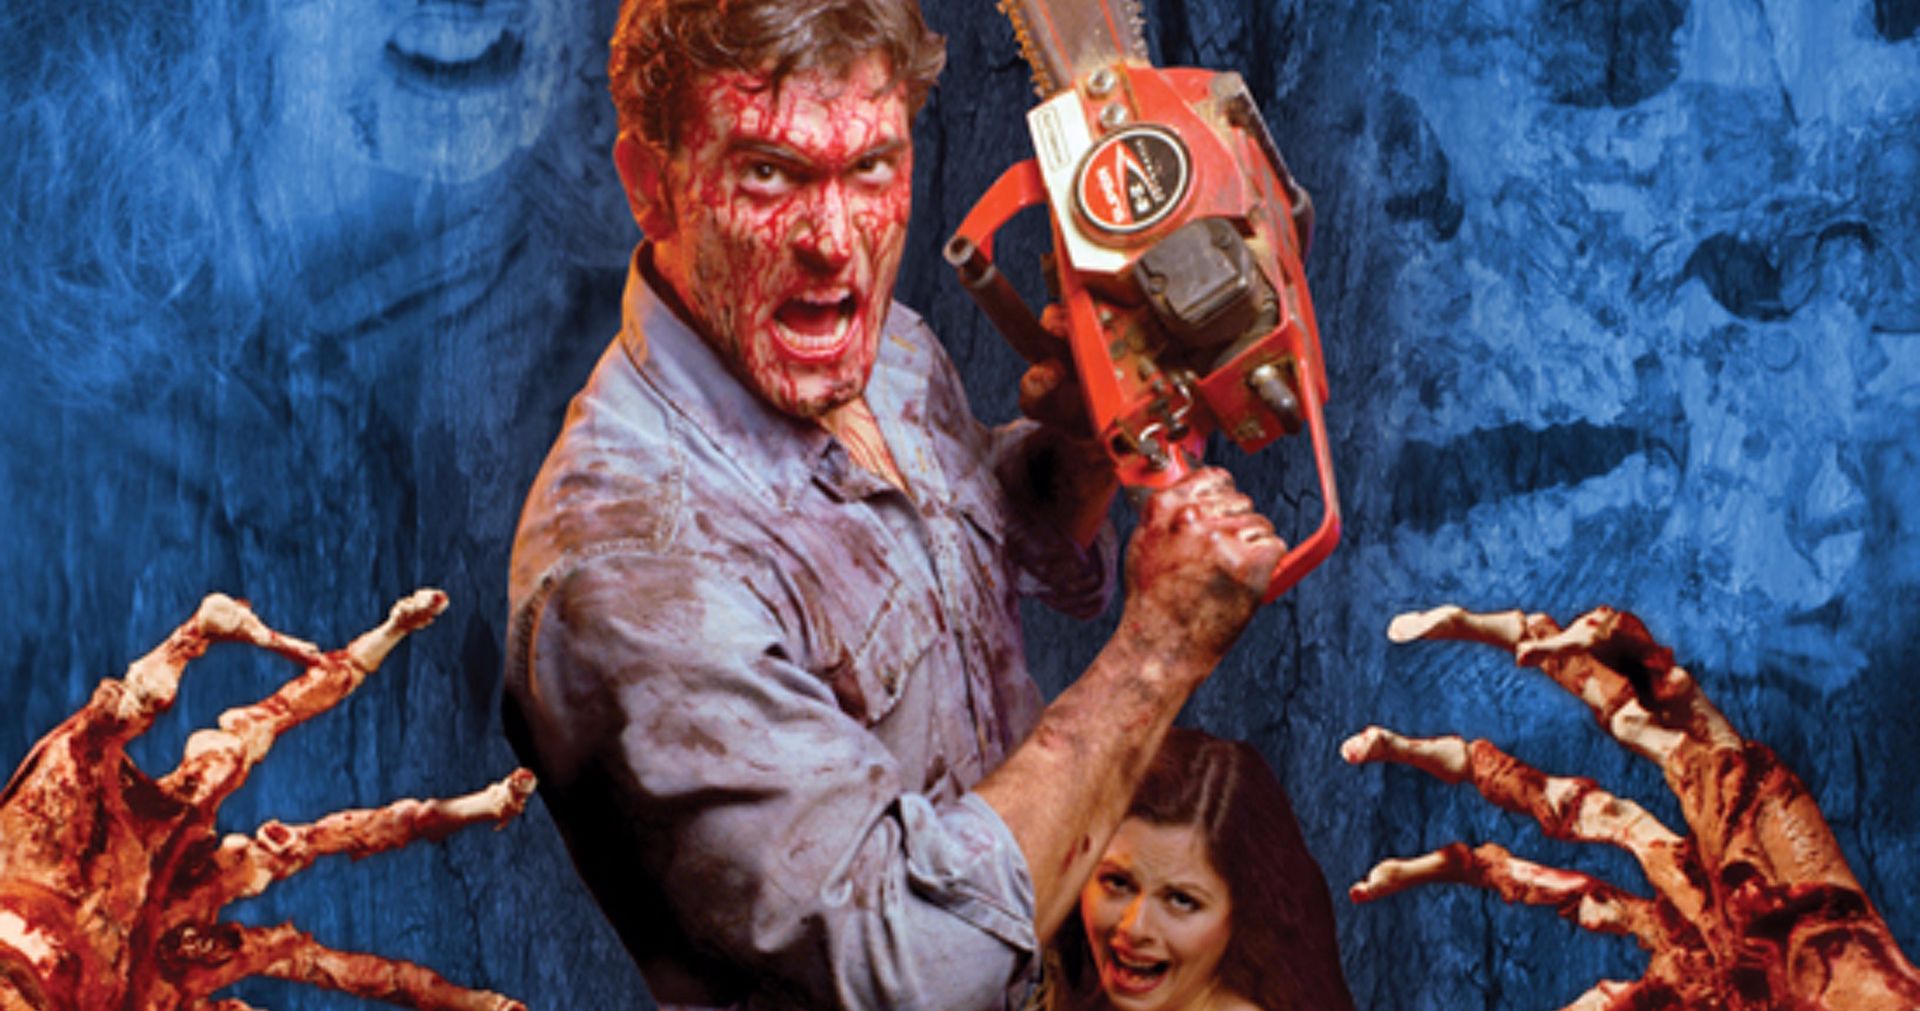 Sam Raimi's The Evil Dead Is Coming to Drive-In Theaters Starting This Weekend